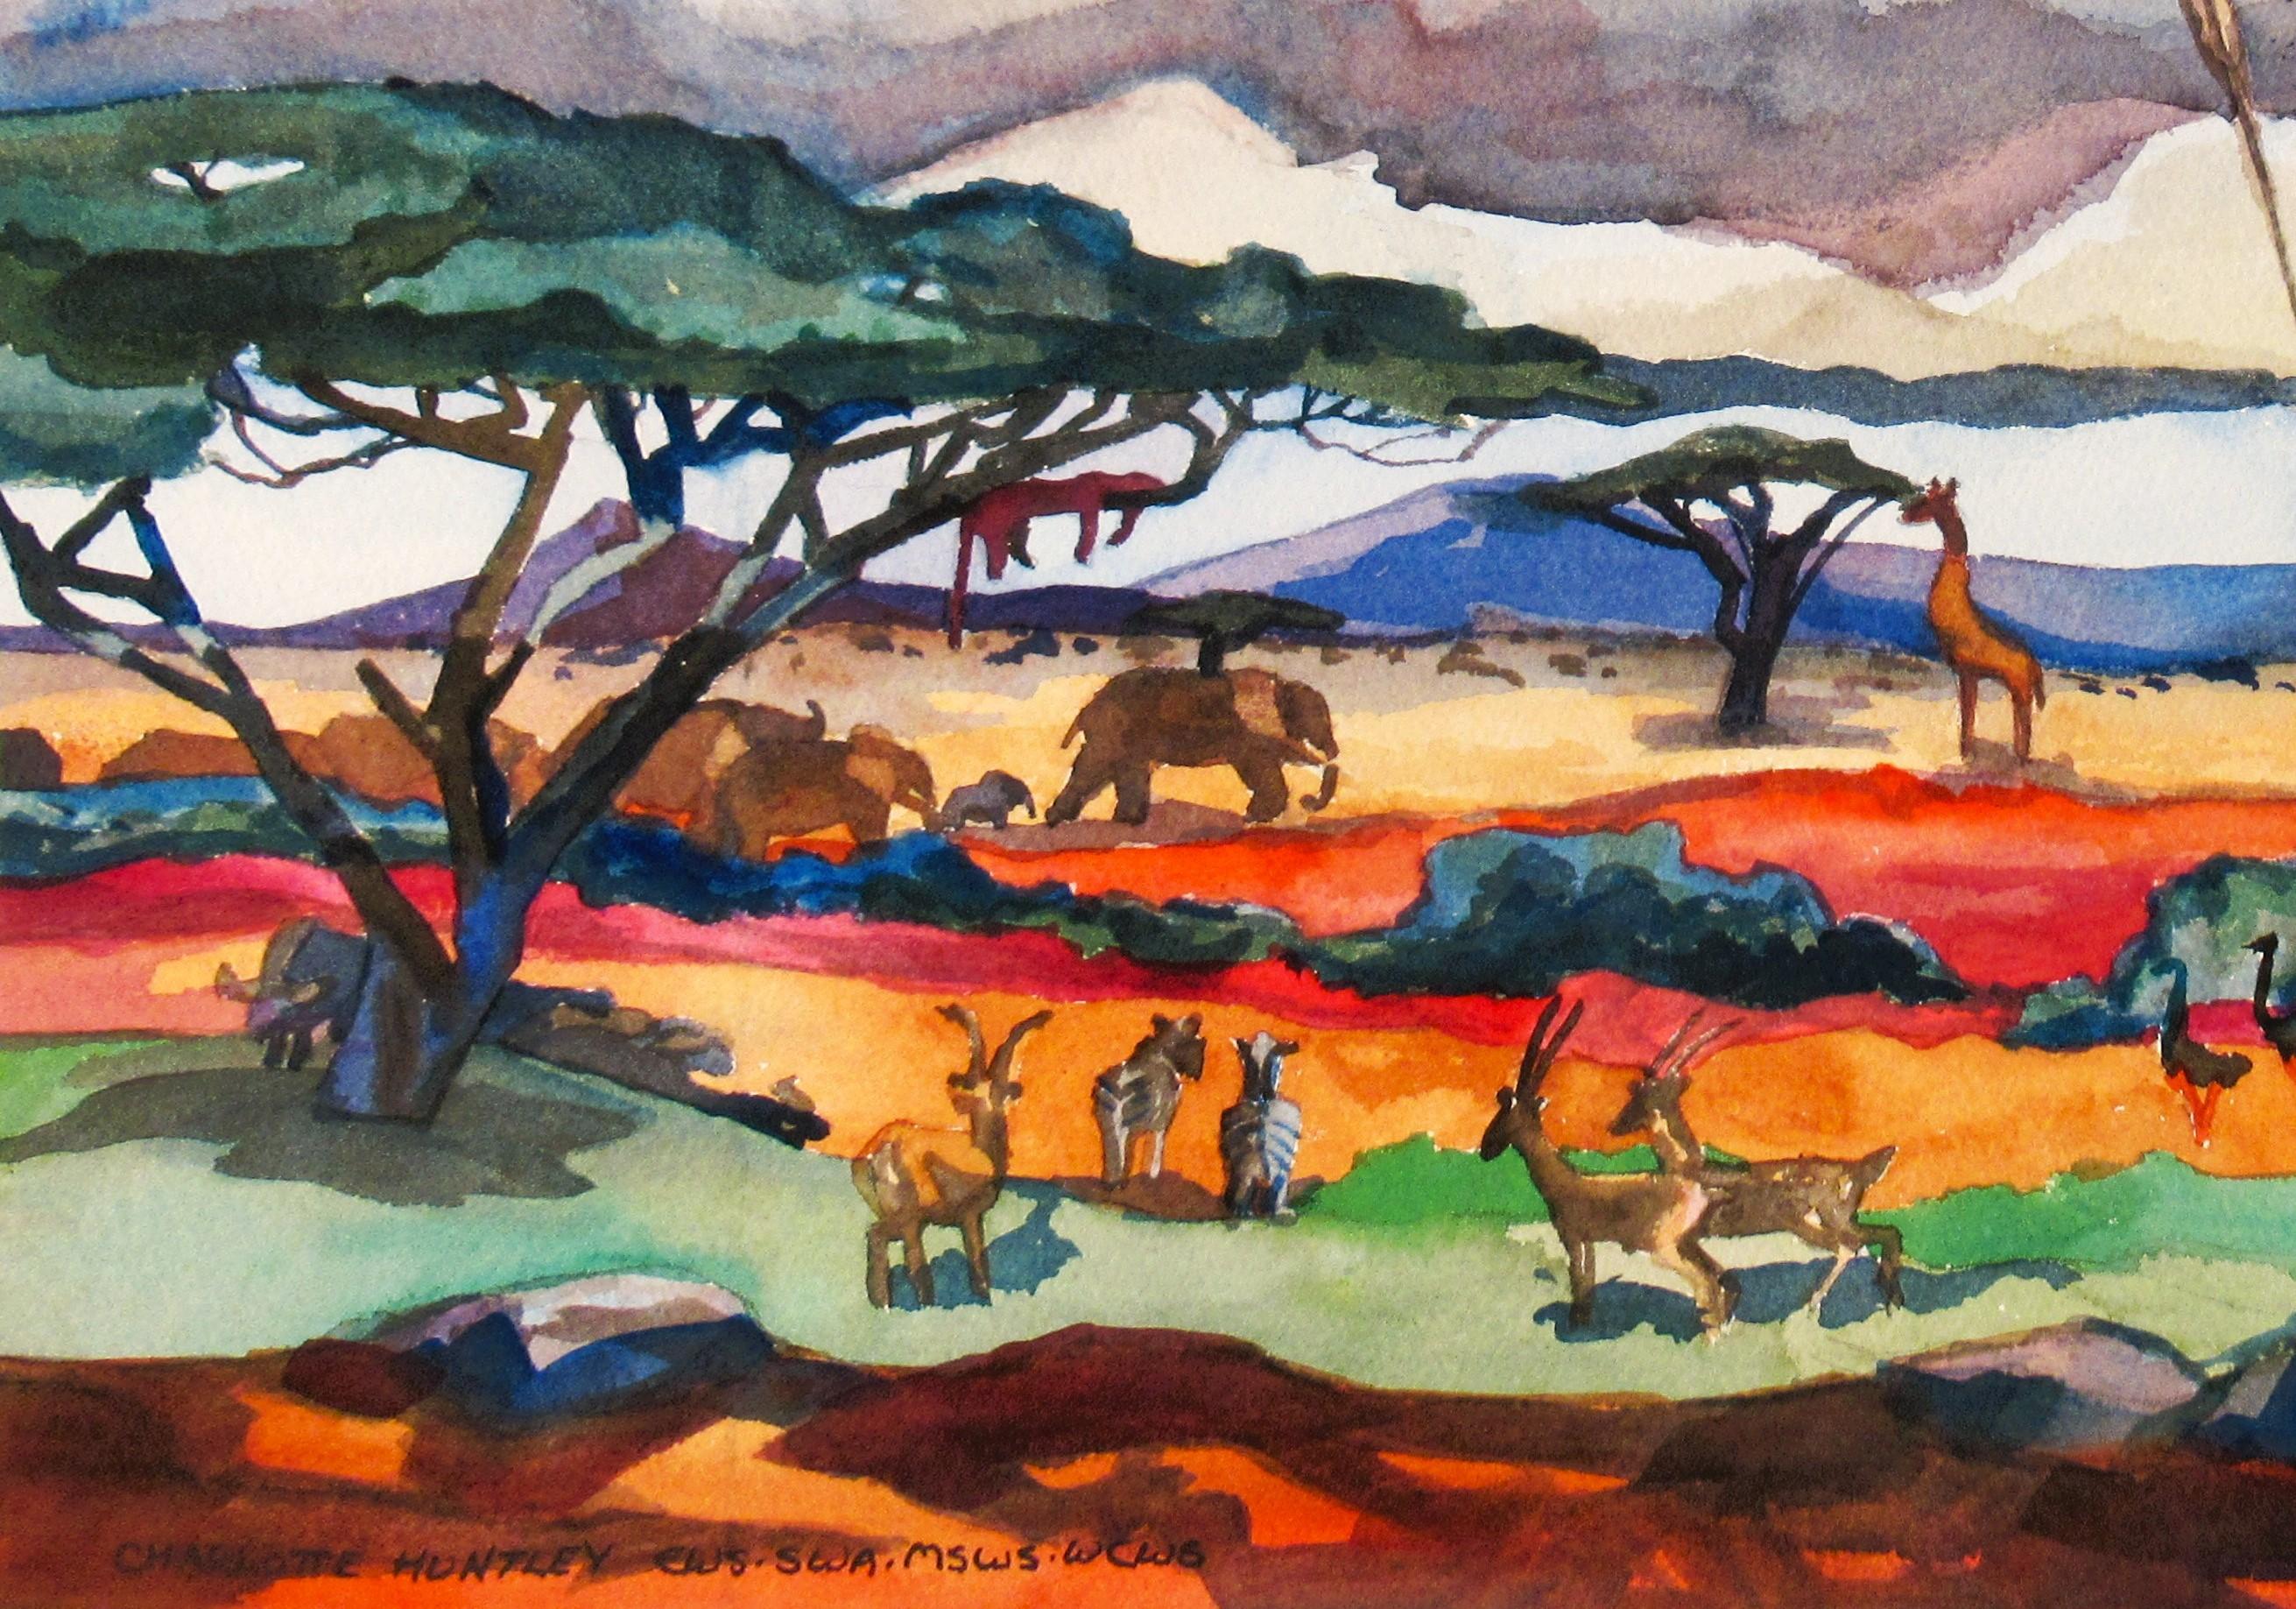 Looking at the Jungle - American Modern Art by Charlotte Huntley